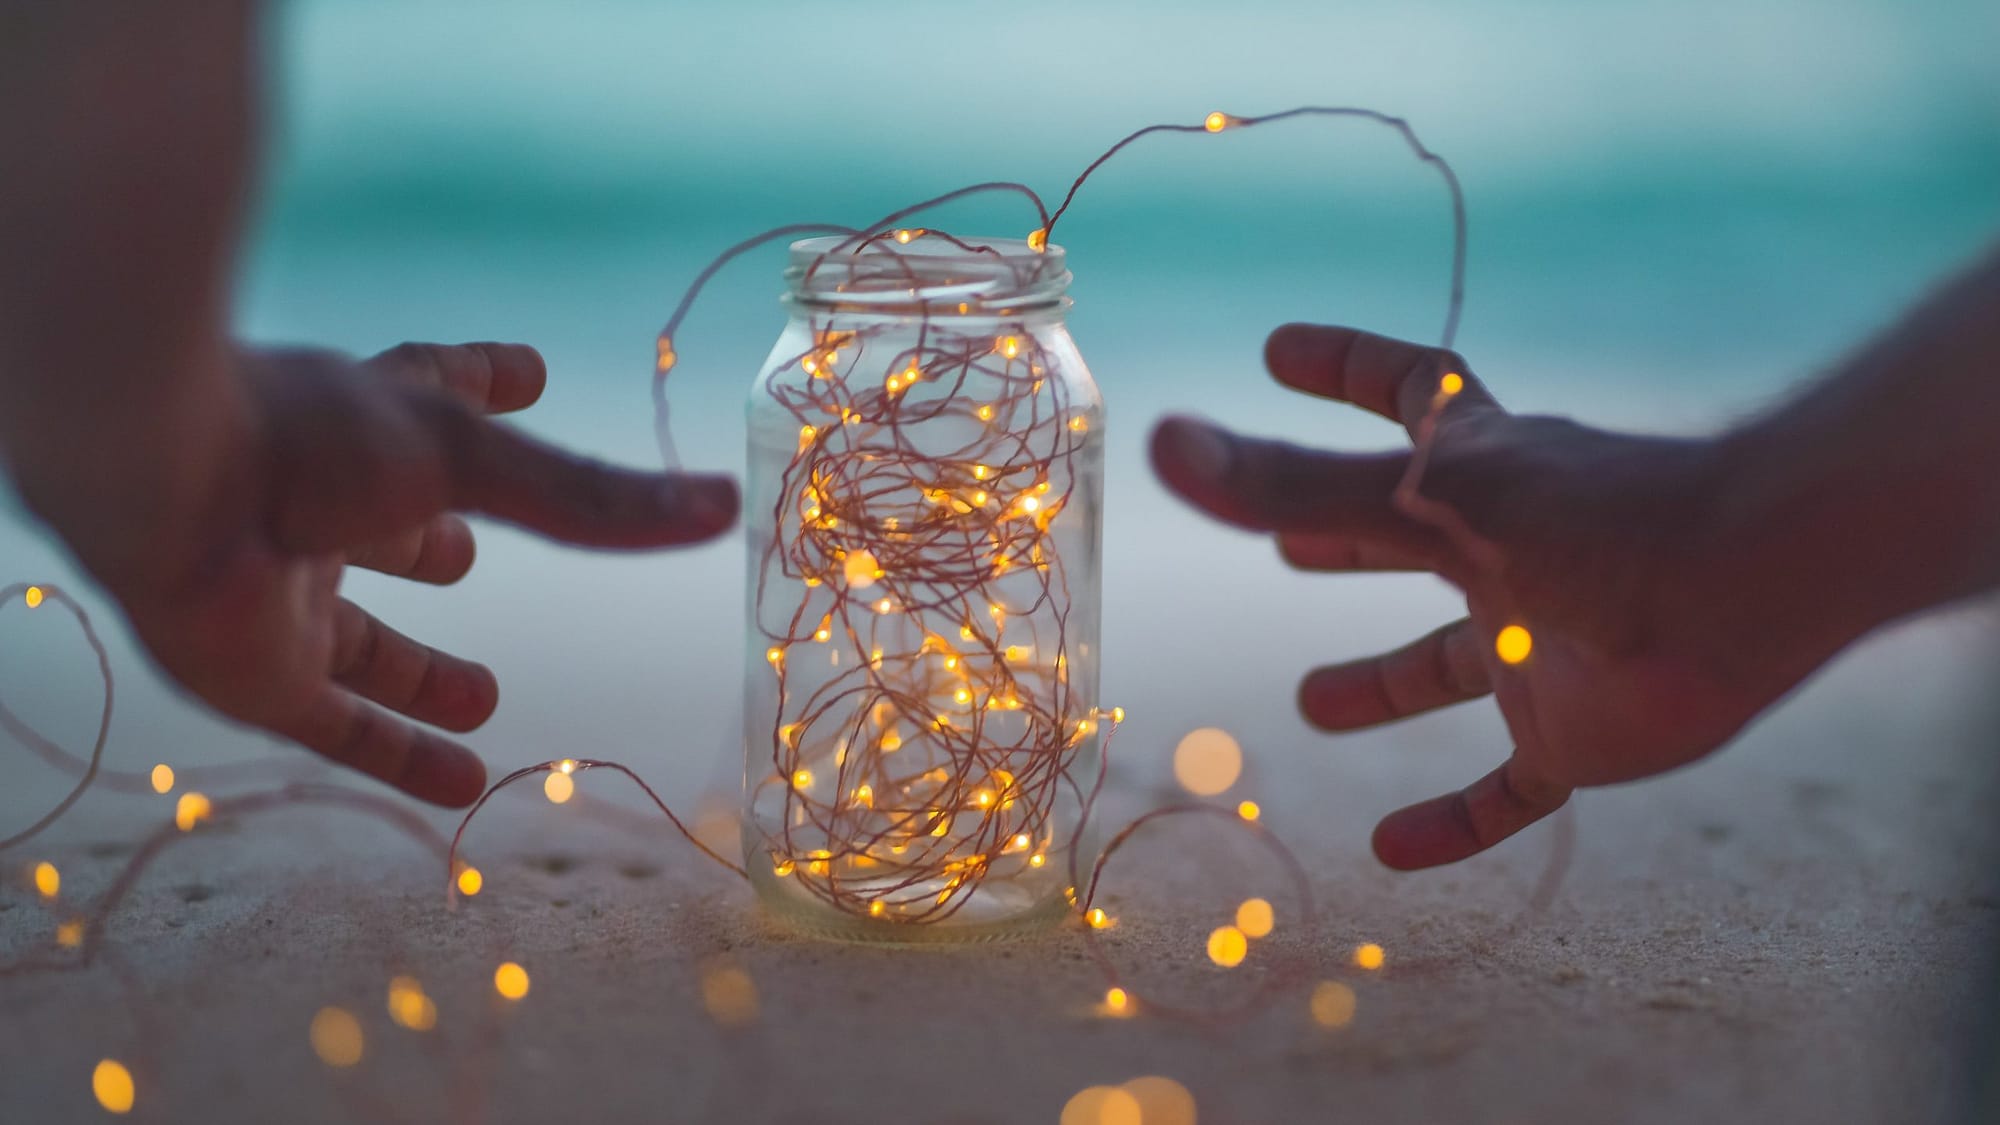 Image: A gratitude jar filled with lights, and a person reaching for it.